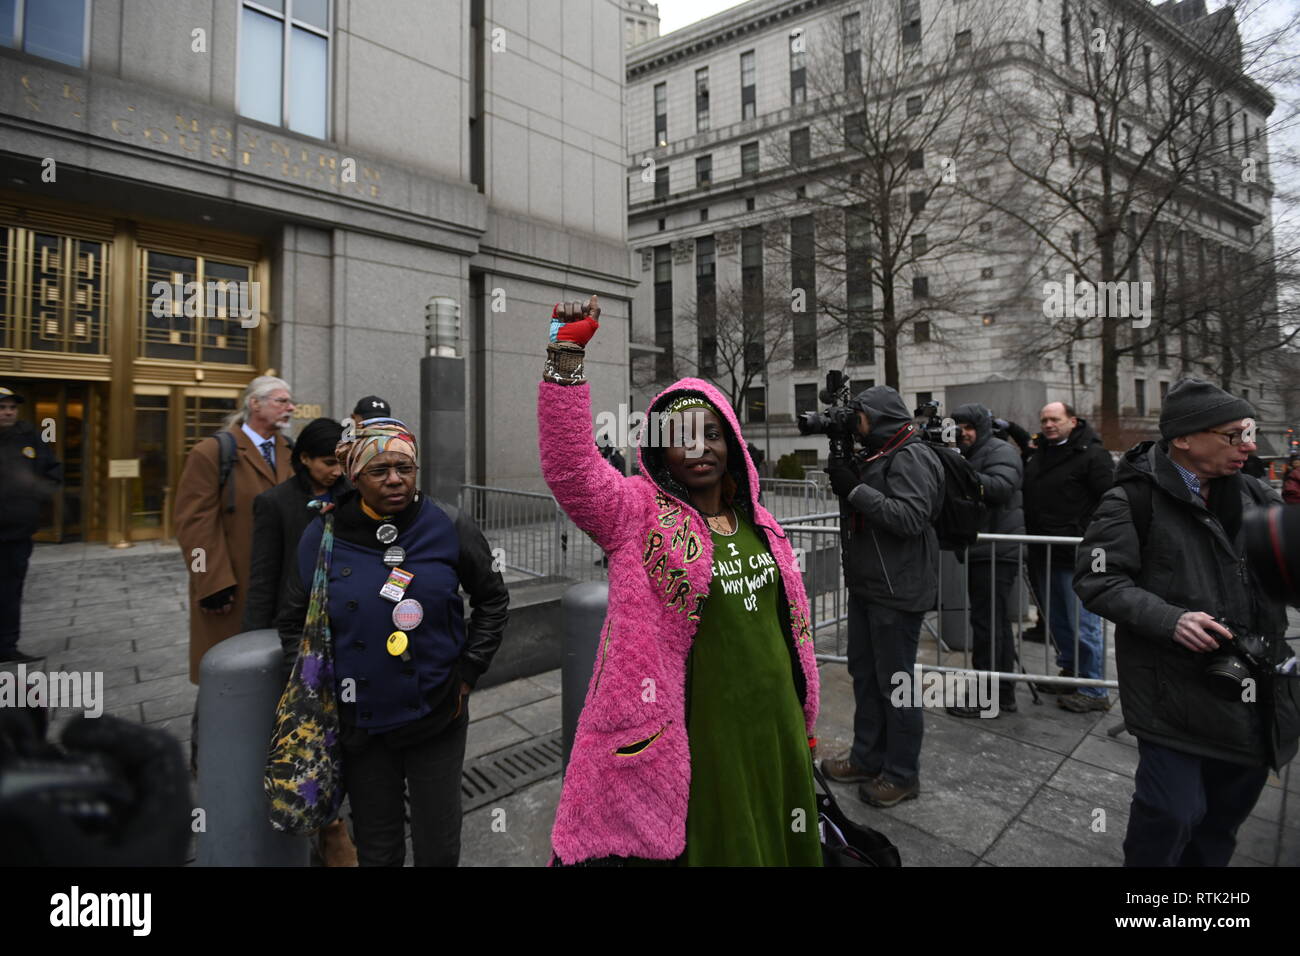 New York, NY, USA. 1 March 2019 New York US Statue of Liberty climber Patricia Okoumou leaves federal court after a magistrate judge ordered her confined to her home with electronic monitoring.  Prosecutors had ask that her bail be revoked after she was arrested for climbing a school for immigrant children in Austin, Texas, in another act of civil disobedience to protest against Trump administration immigration policies. Credit: Joseph Reid/Alamy Live News Stock Photo